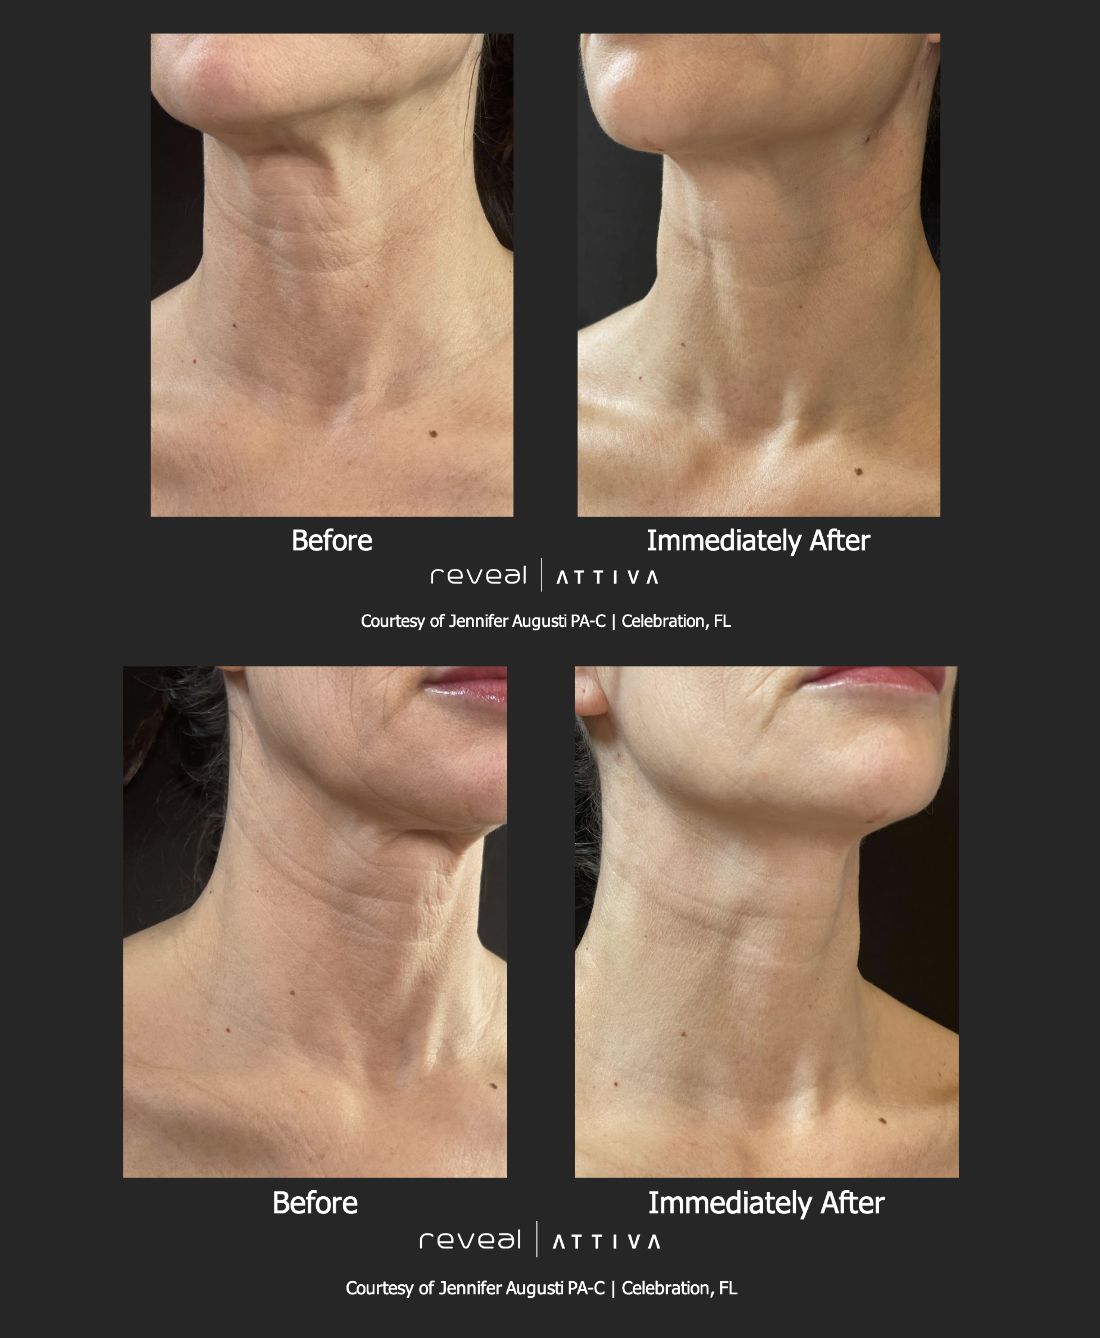 Before and After ATTIVA treatment